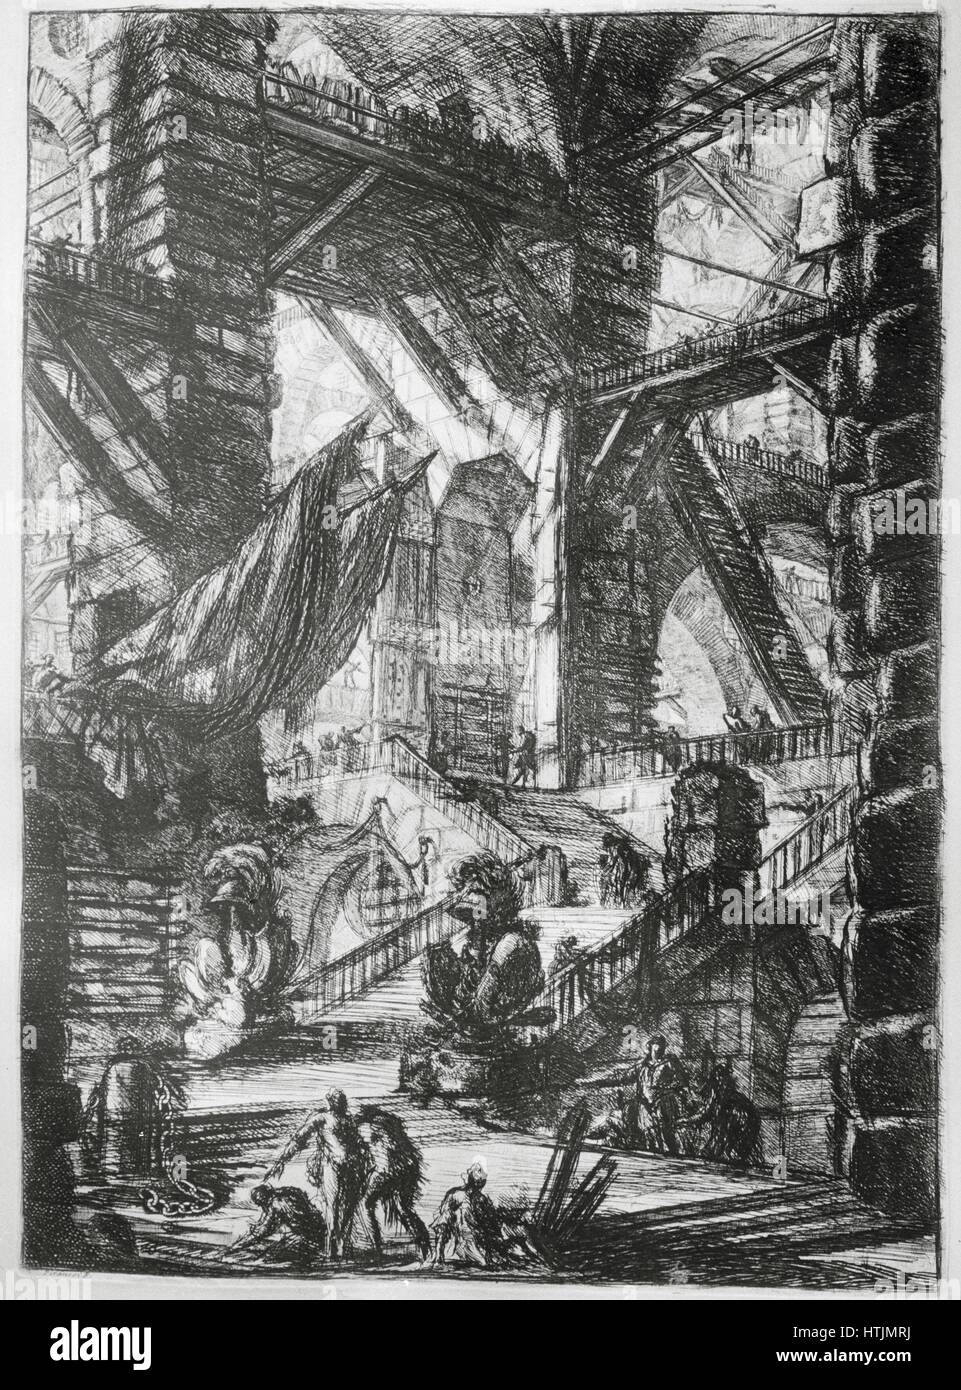 The Imaginary Prisons (Carceri d'invenzione), second version of the series of engravings by Giovanni Battista Piranesi, published in 1761. Plate VIII: The Staircase with Trophies Private collection Stock Photo